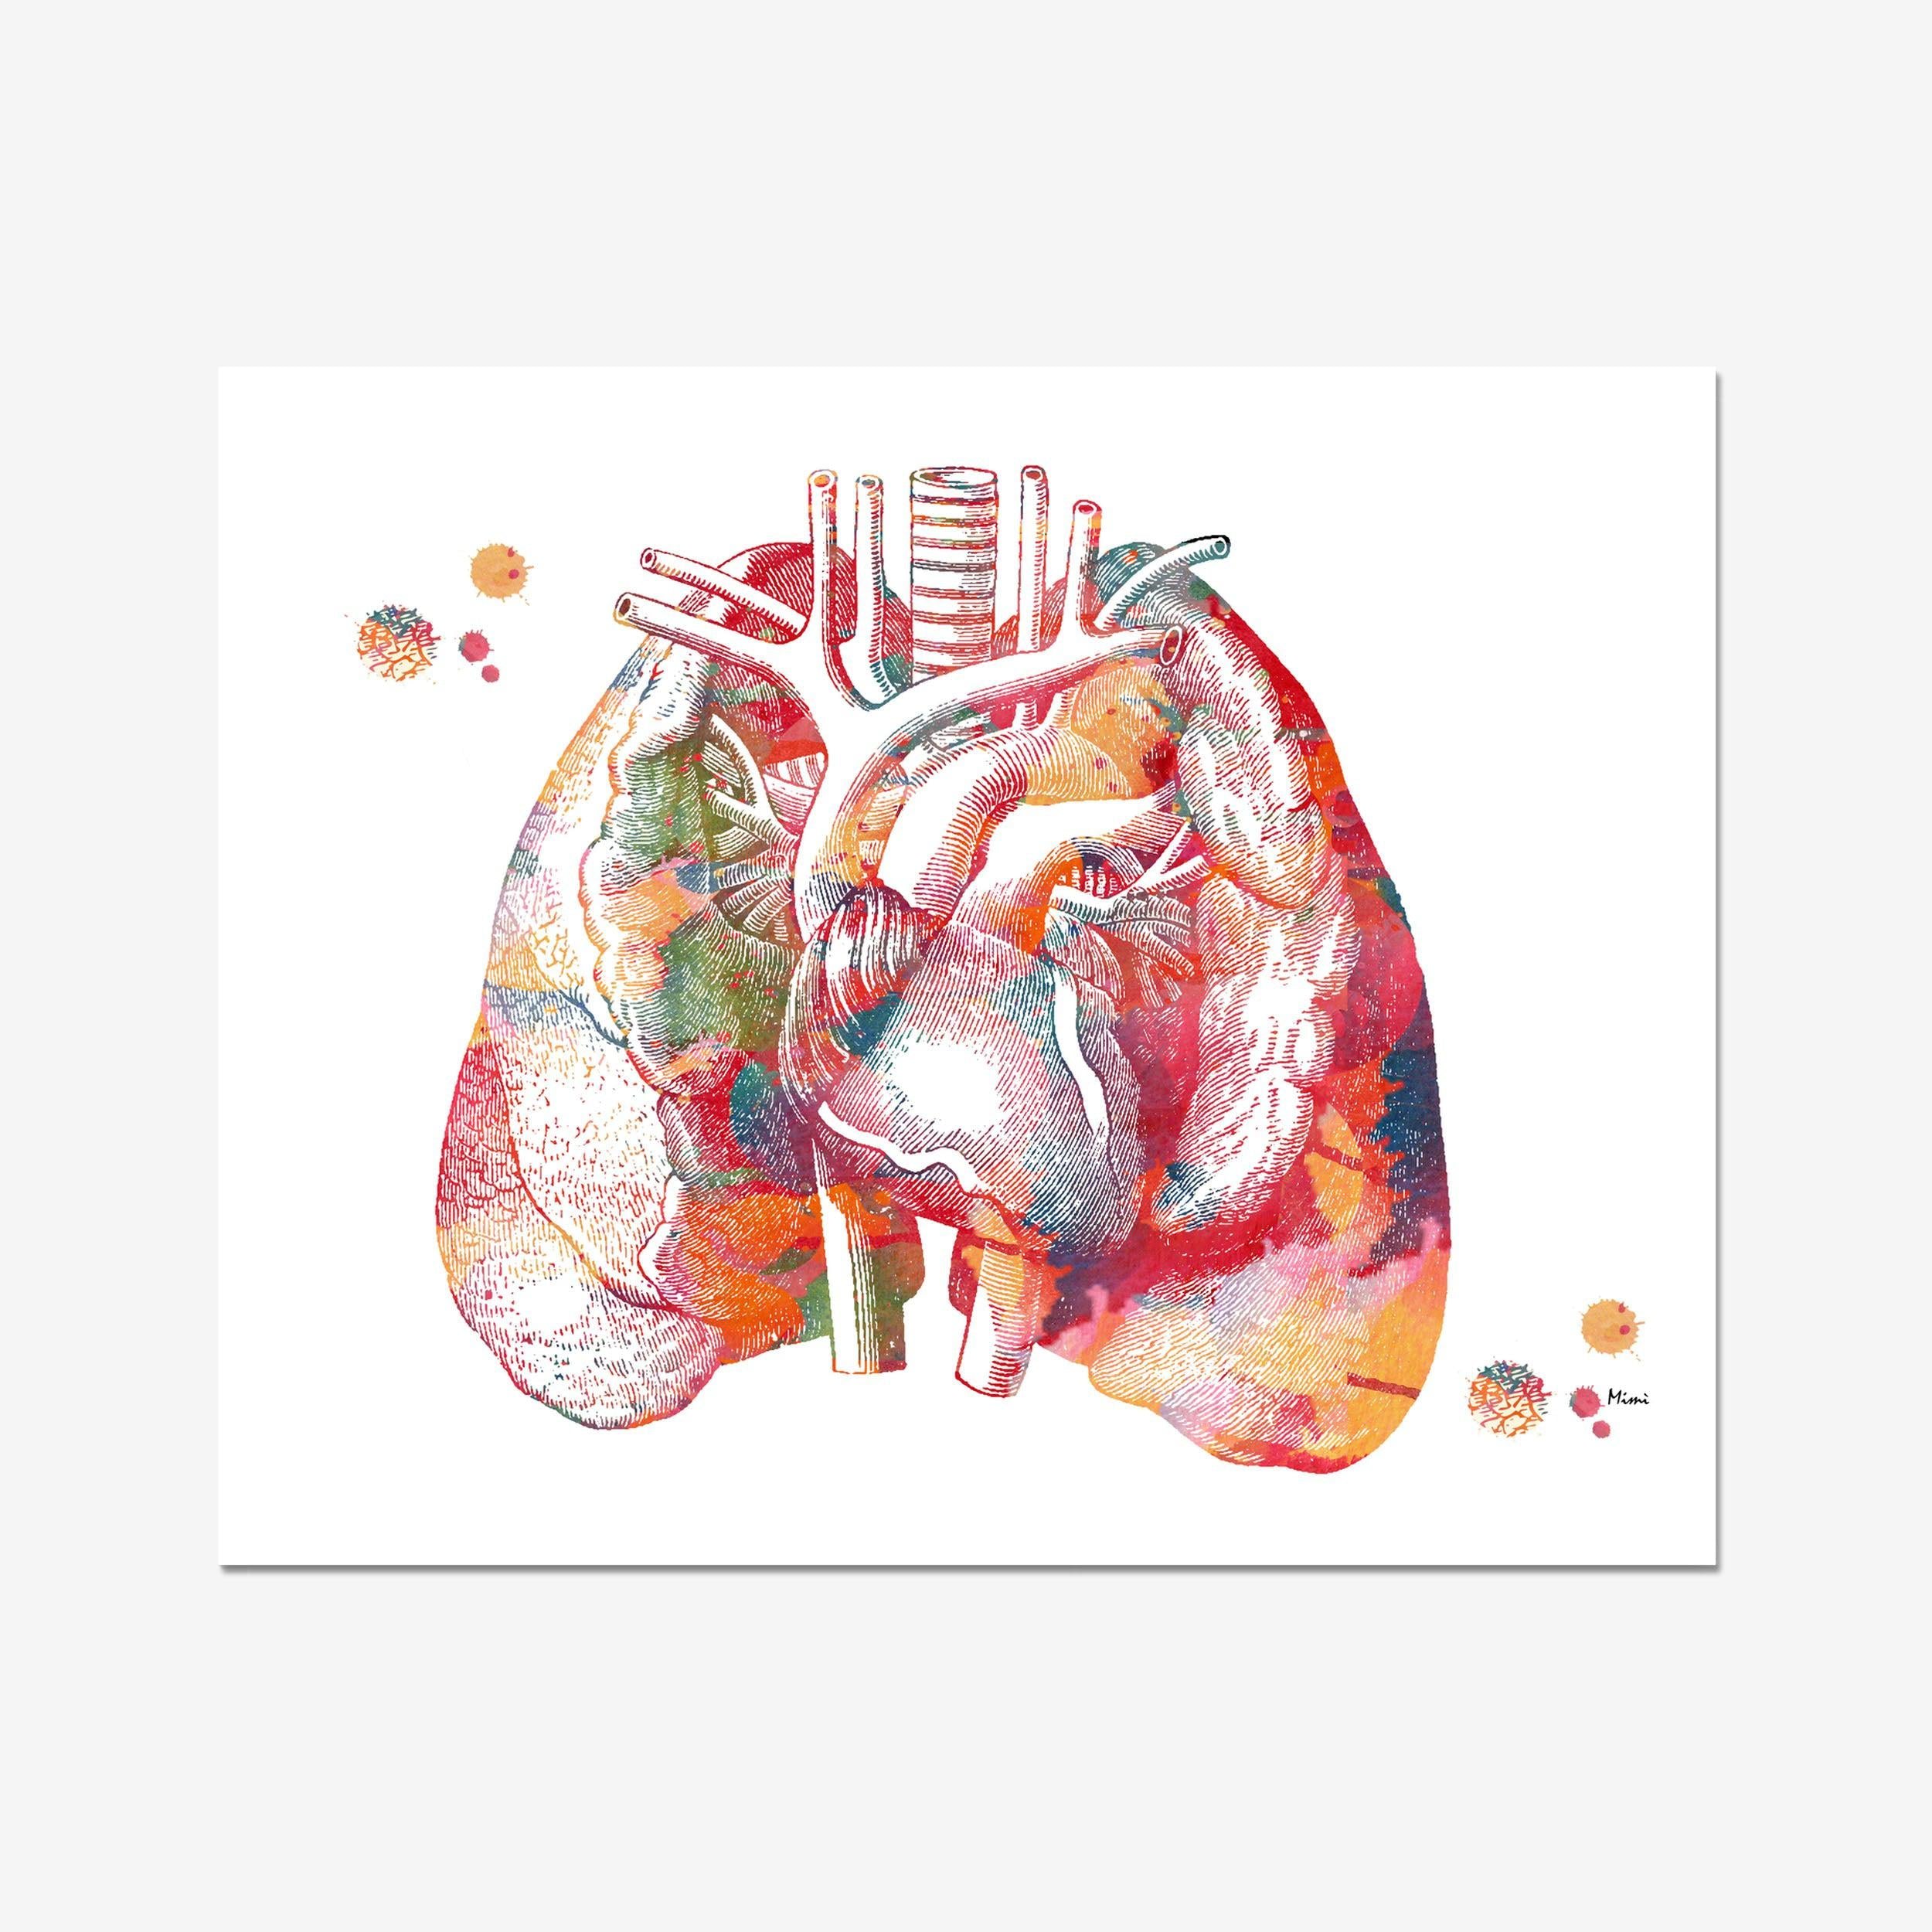 Lungs and Heart Anatomy Art Print The Heart In The Middle Of Chest Cardiovascular System Poster